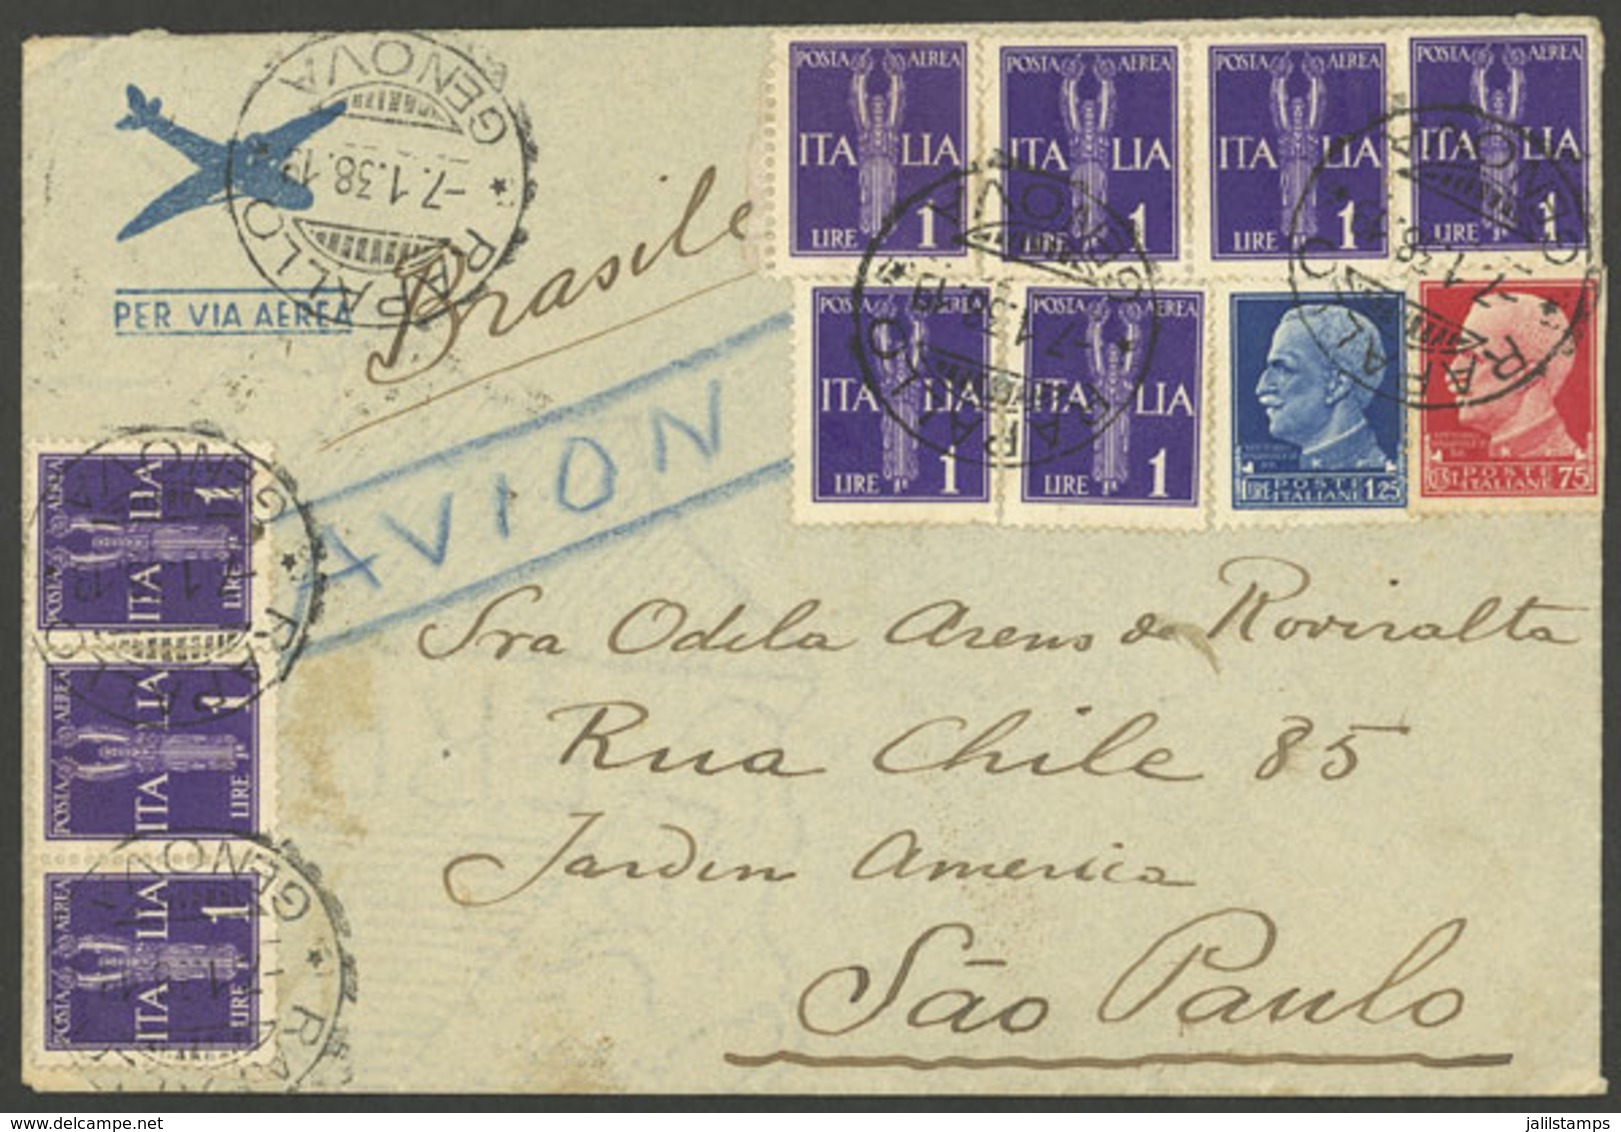 ITALY: 7/JA/1938 Rapallo - Brazil, Airmail Cover With 11L, Arrival Backstamps, VF - Unclassified